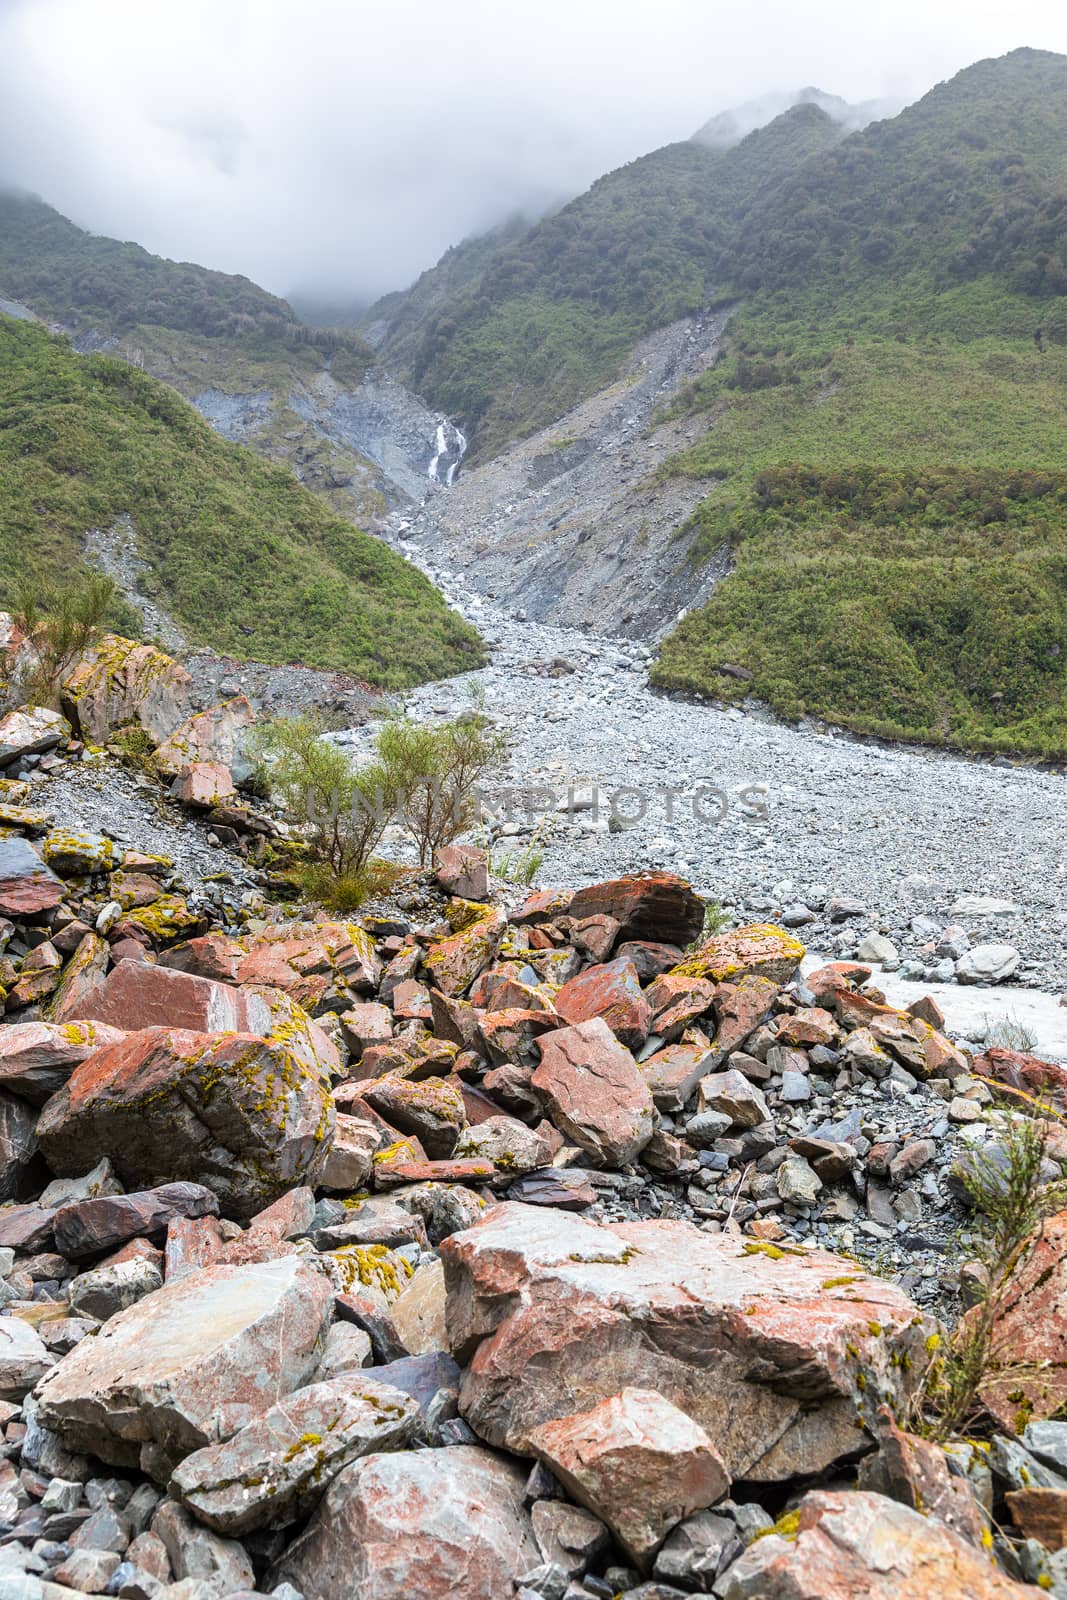 An image of the riverbed of the Franz Josef Glacier, New Zealand